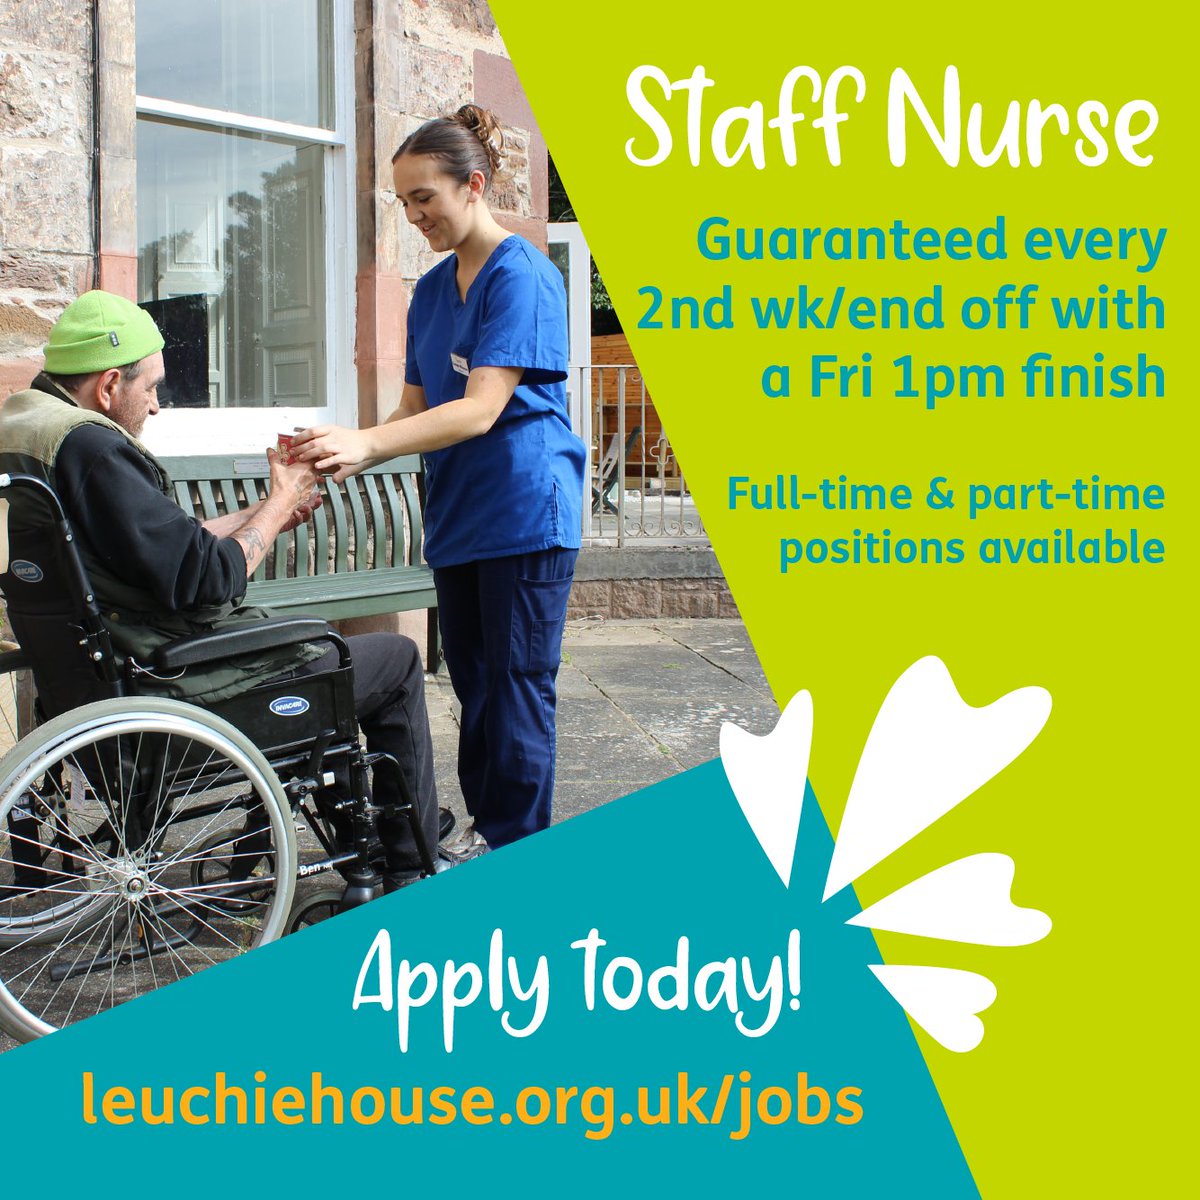 Exciting opp for a staff nurse to join our dedicated team, providing professional clinical nursing to our guests and ideally have a genuine passion and interest in working with neurological conditions. 👇💚 Find out more about Leuchie and our benefits... leuchiehouse.org.uk/jobs